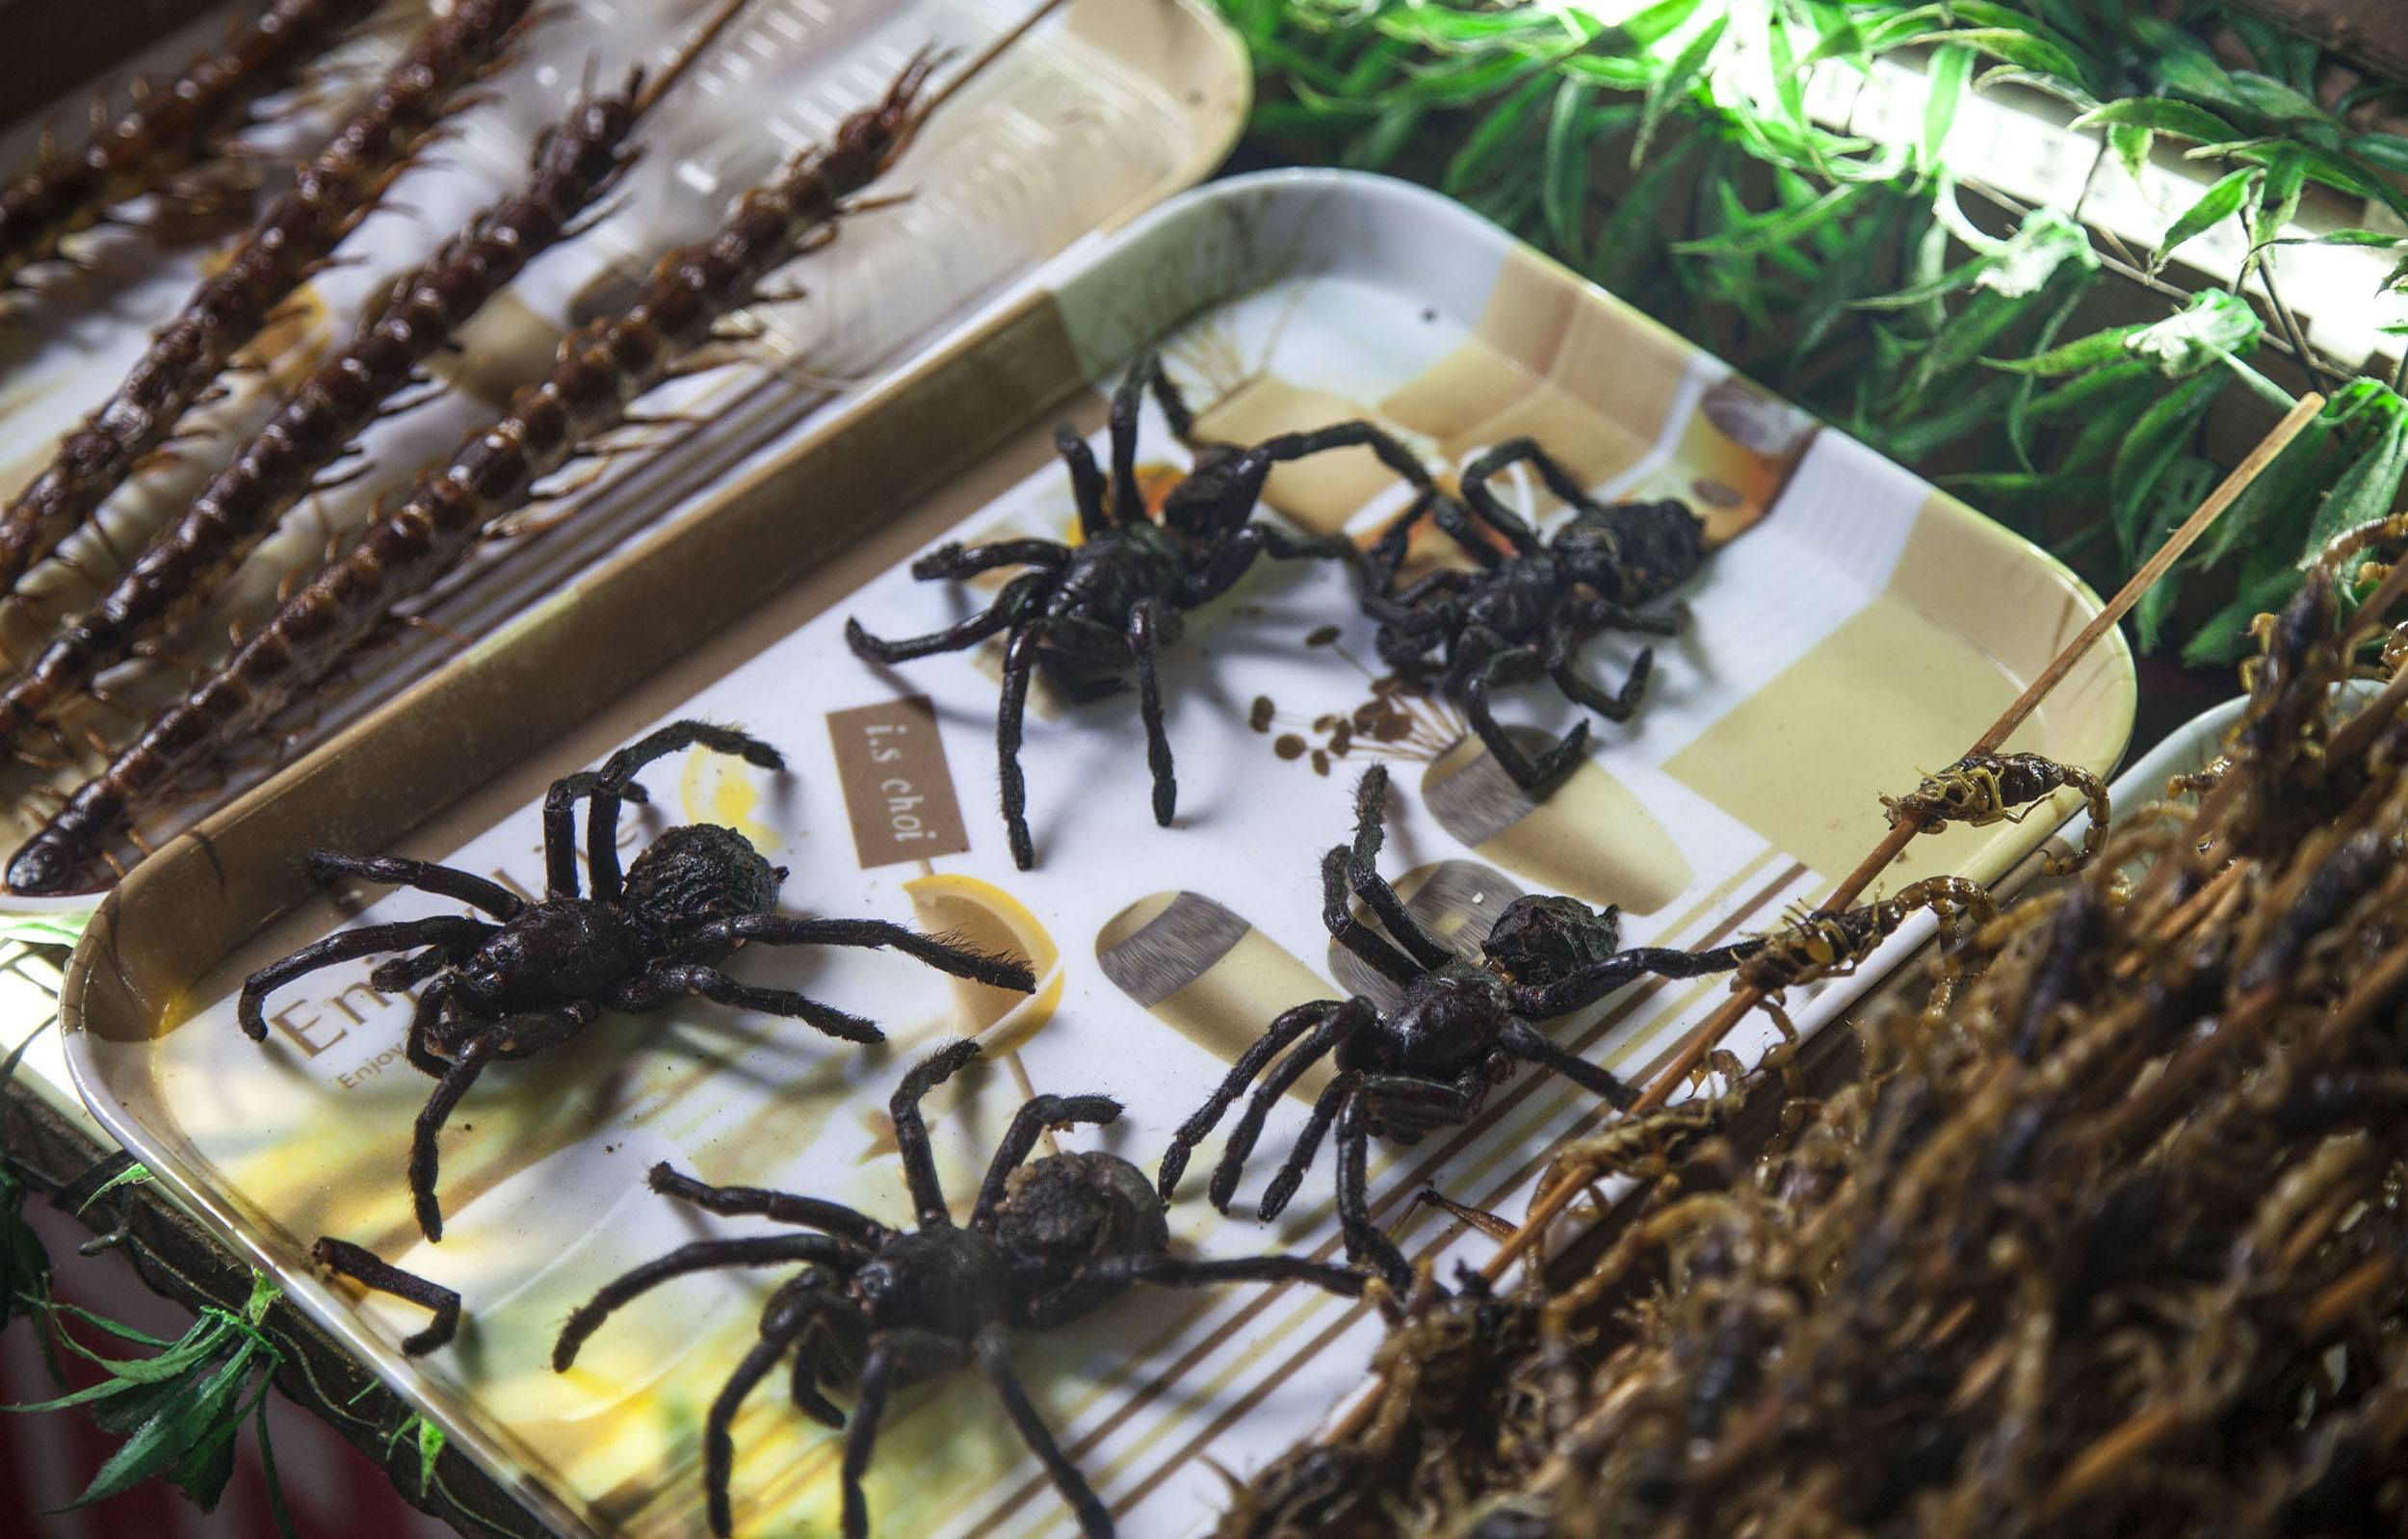 Spiders at a food market in China